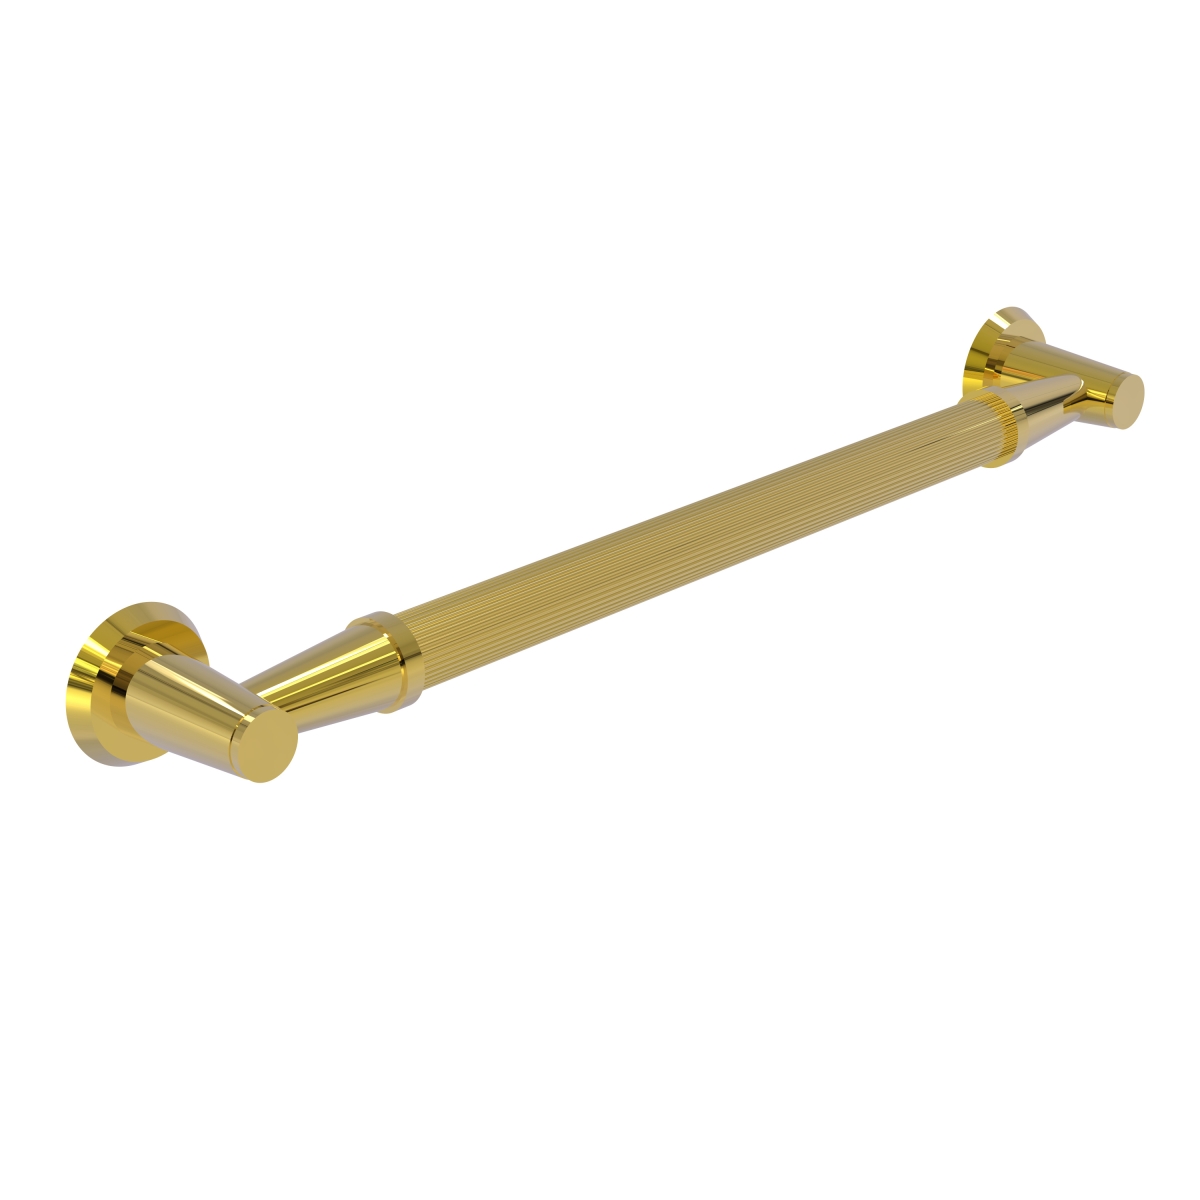 Picture of Allied Brass MD-GRR-16-PB 16 in. Reeded Grab Bar, Polished Brass - 3.5 x 18 x 16 in.